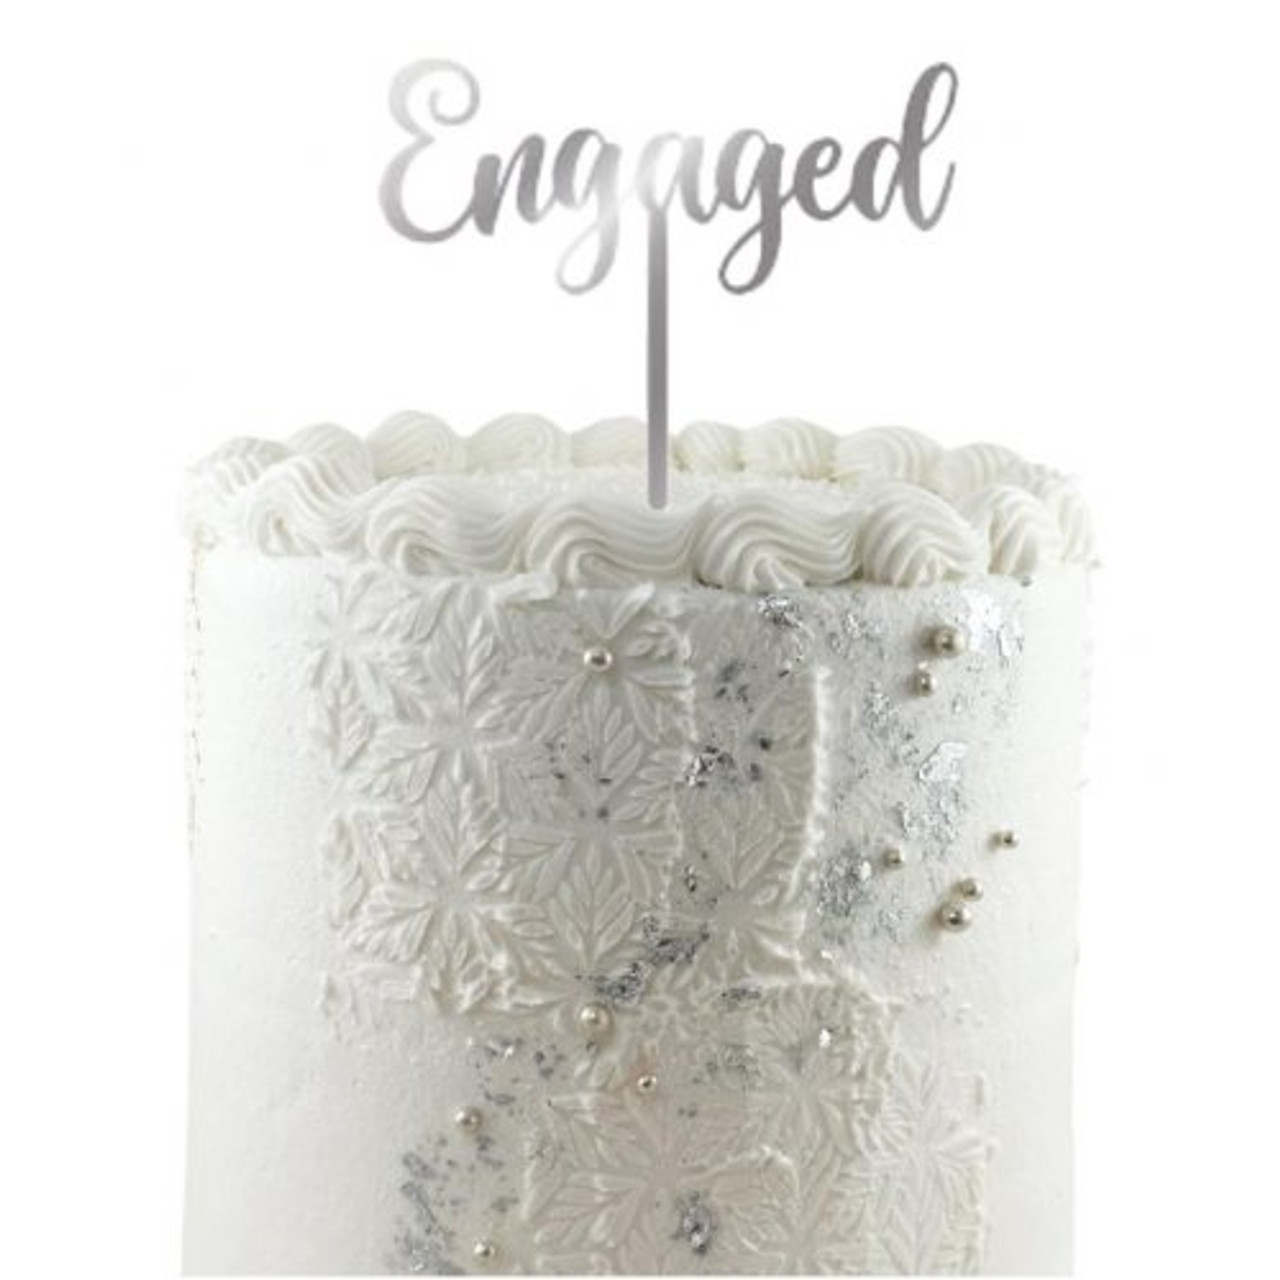 Engaged Silver Cake Topper ACRYLIC